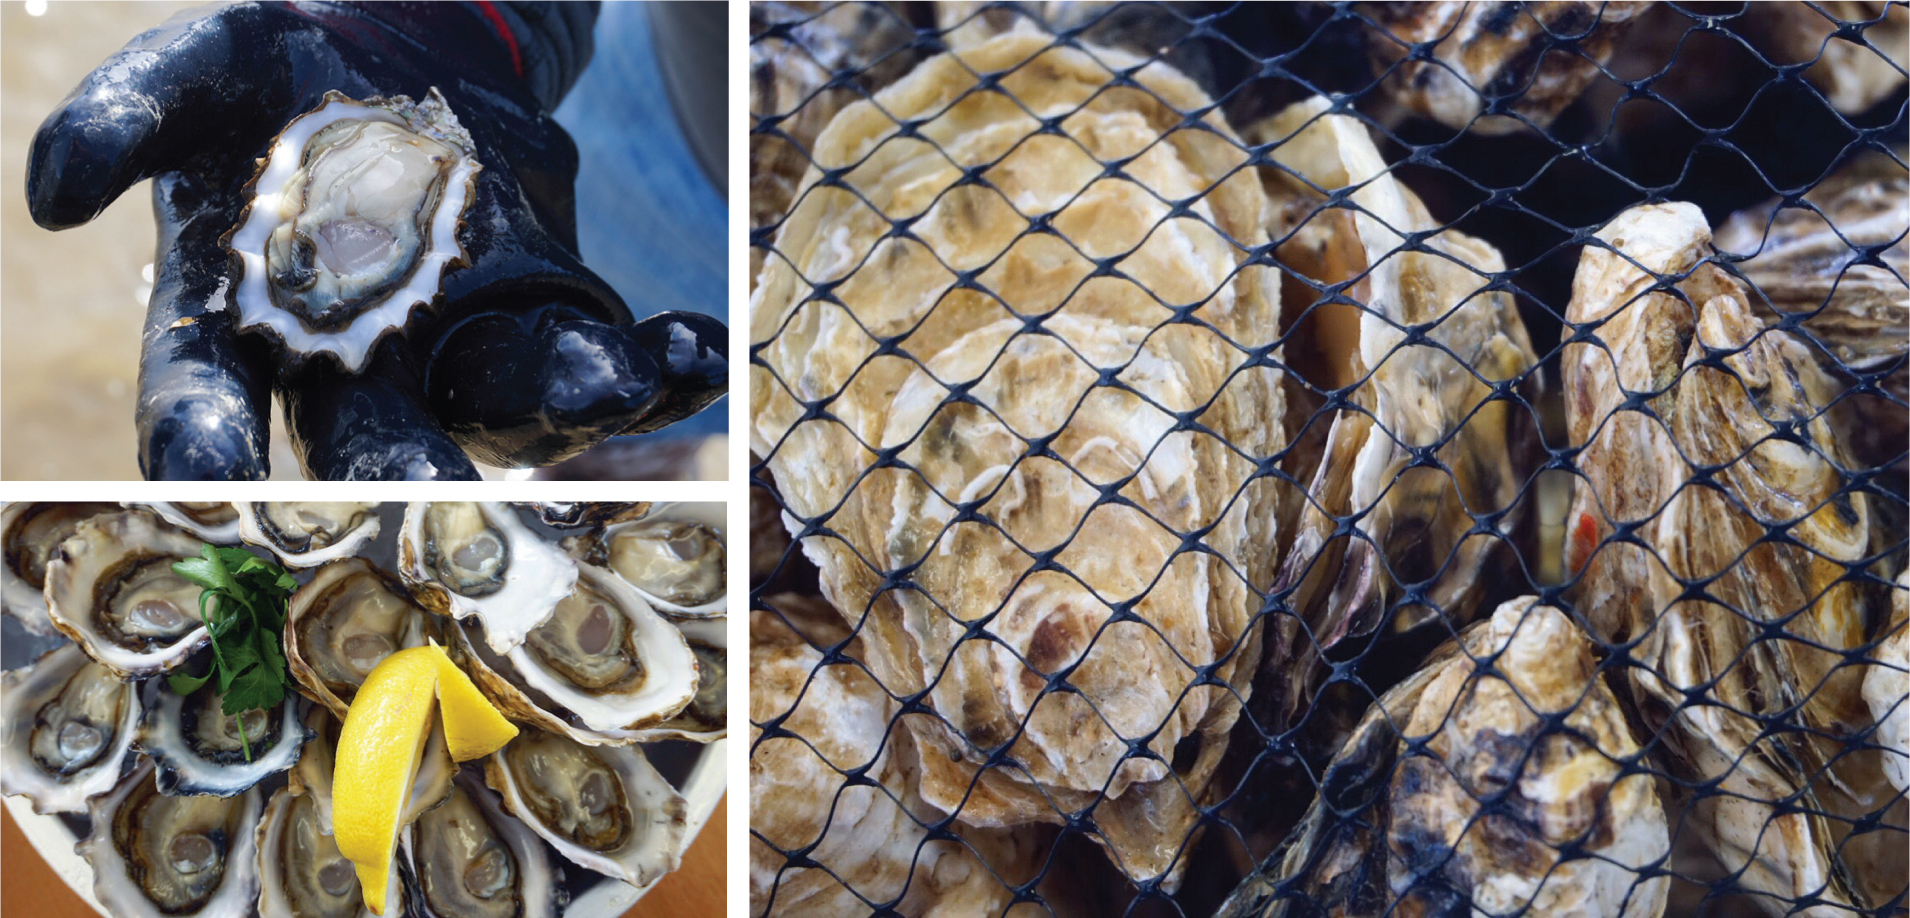 Fanny Bay Oysters images